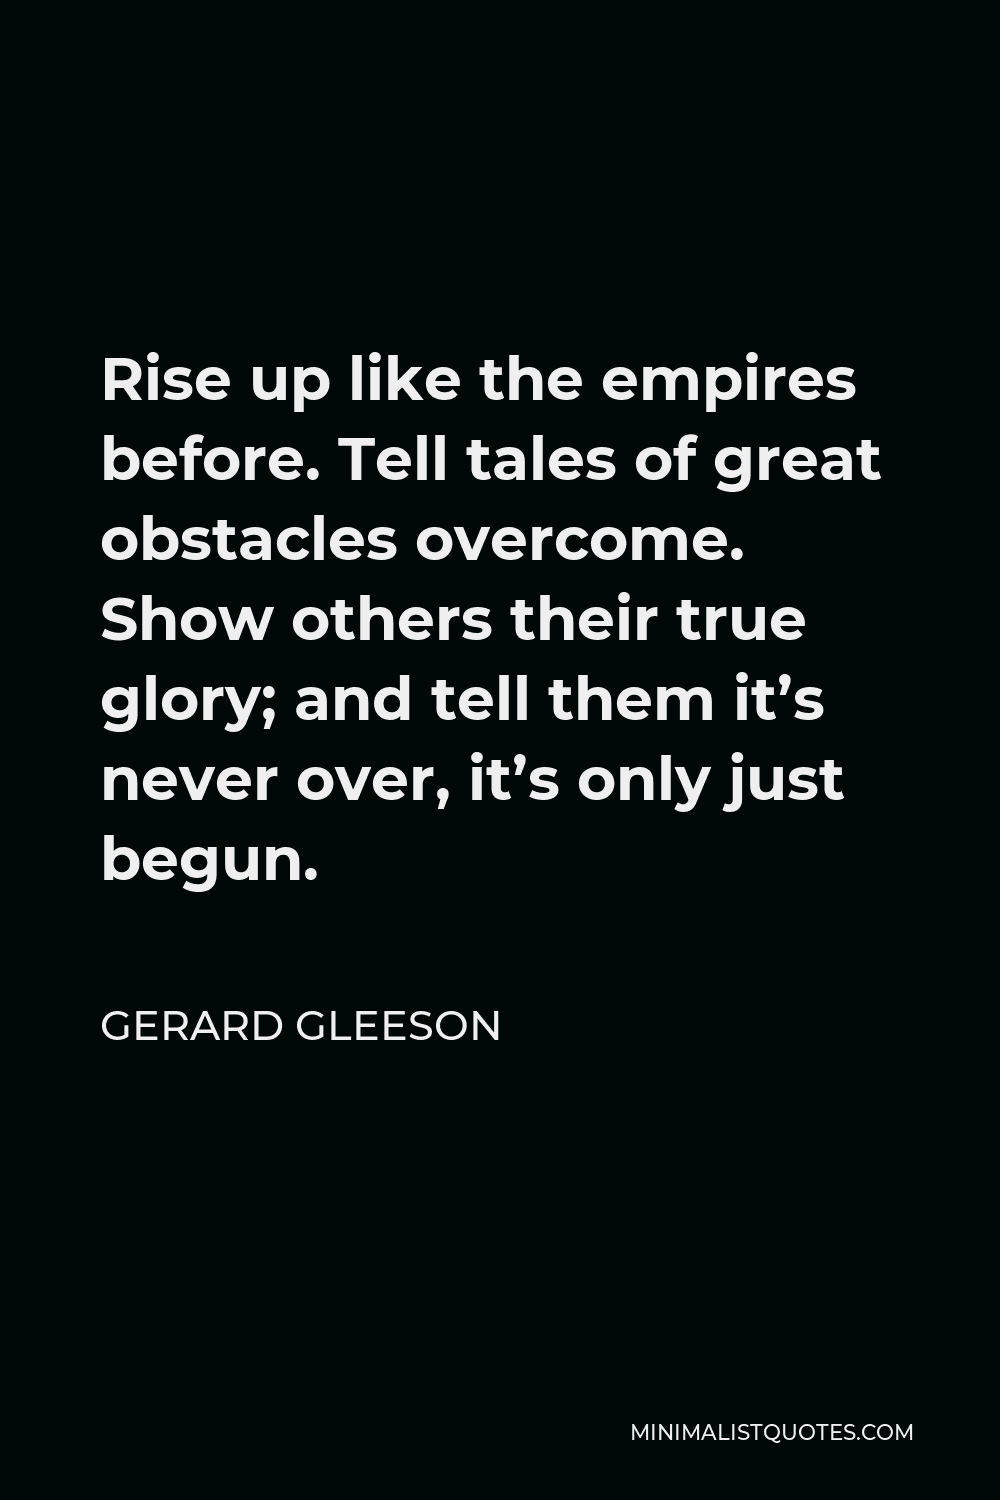 Gerard Gleeson Quote - Rise up like the empires before. Tell tales of great obstacles overcome. Show others their true glory; and tell them it’s never over, it’s only just begun.